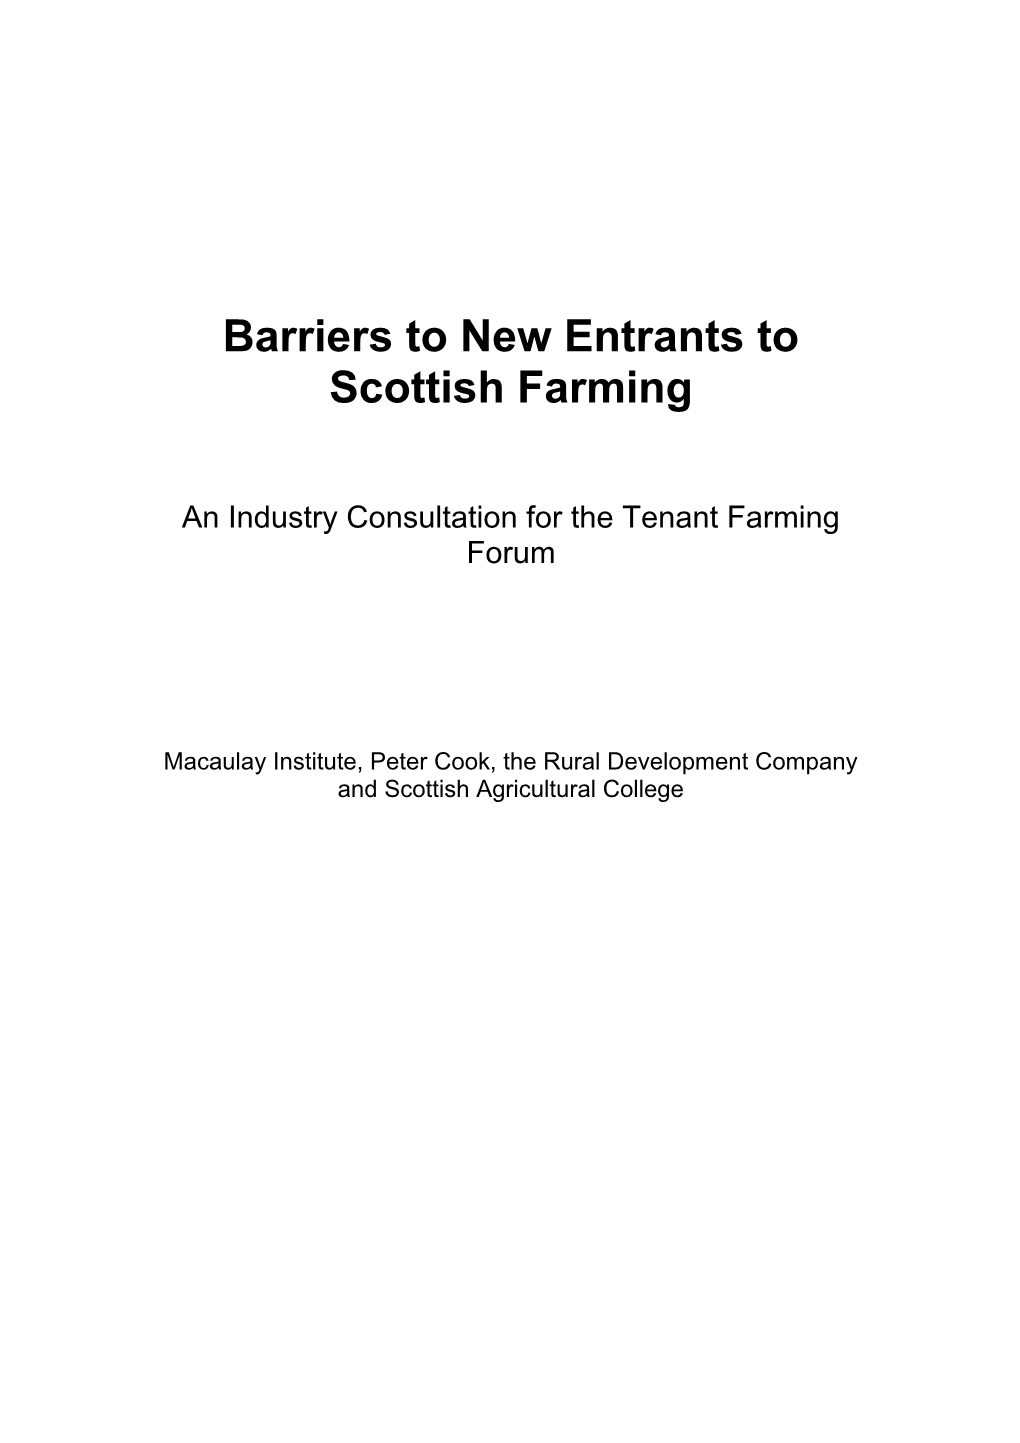 Barriers to New Entrants to Scottish Farming